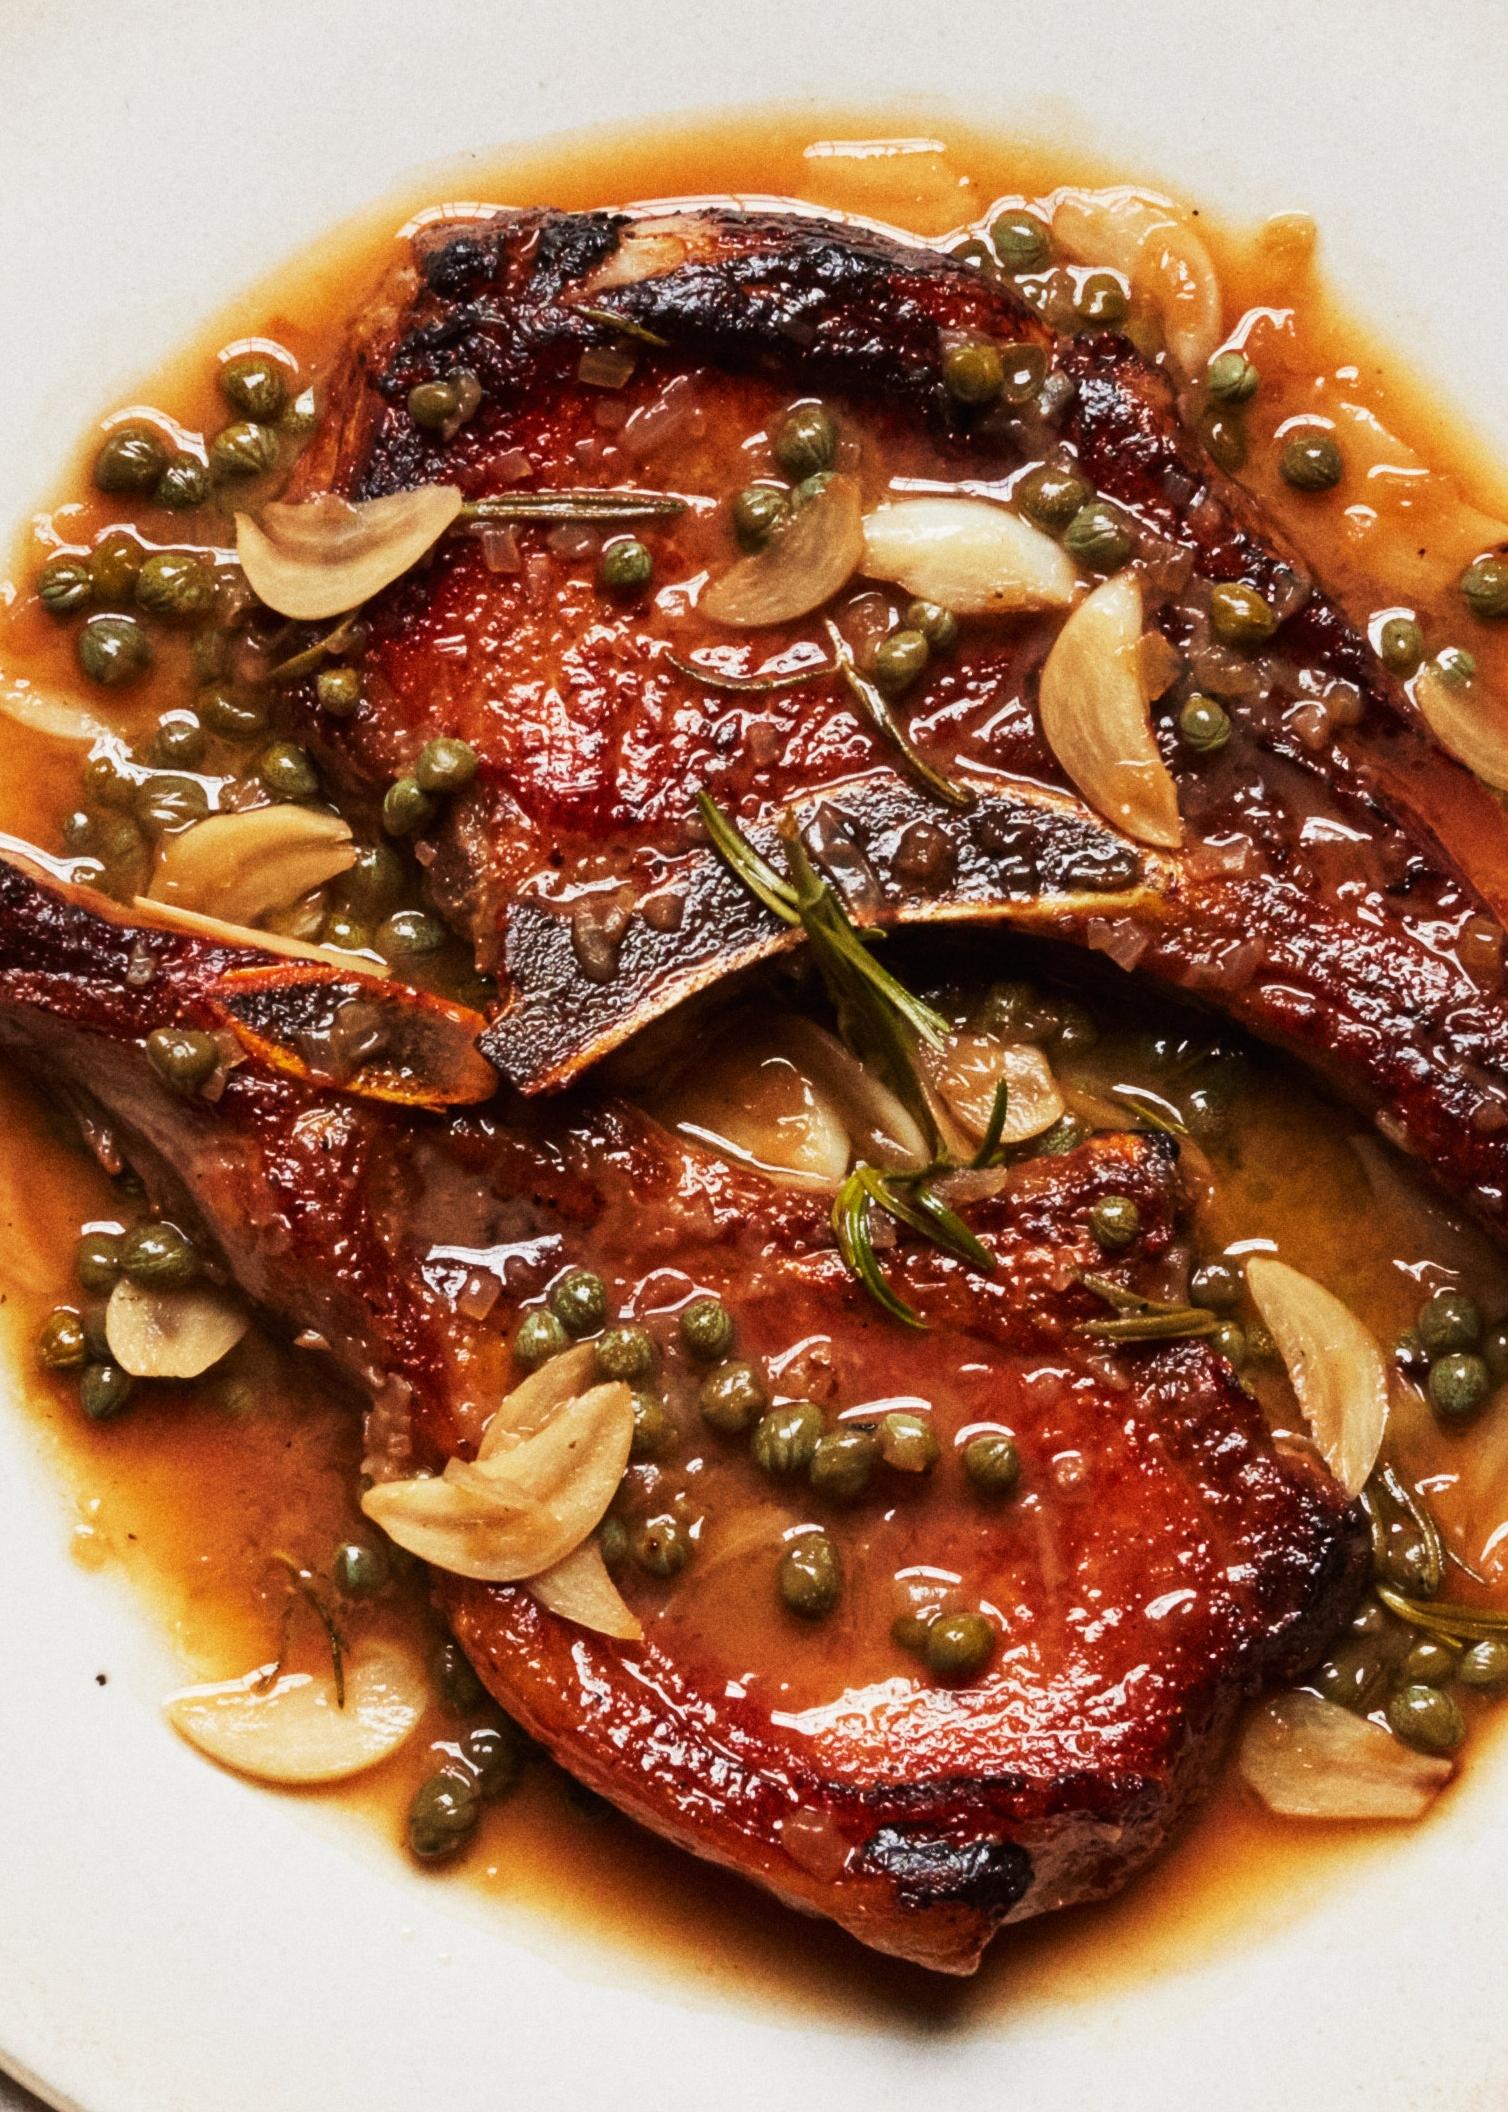  Nothing screams comfort food louder than these pork chops